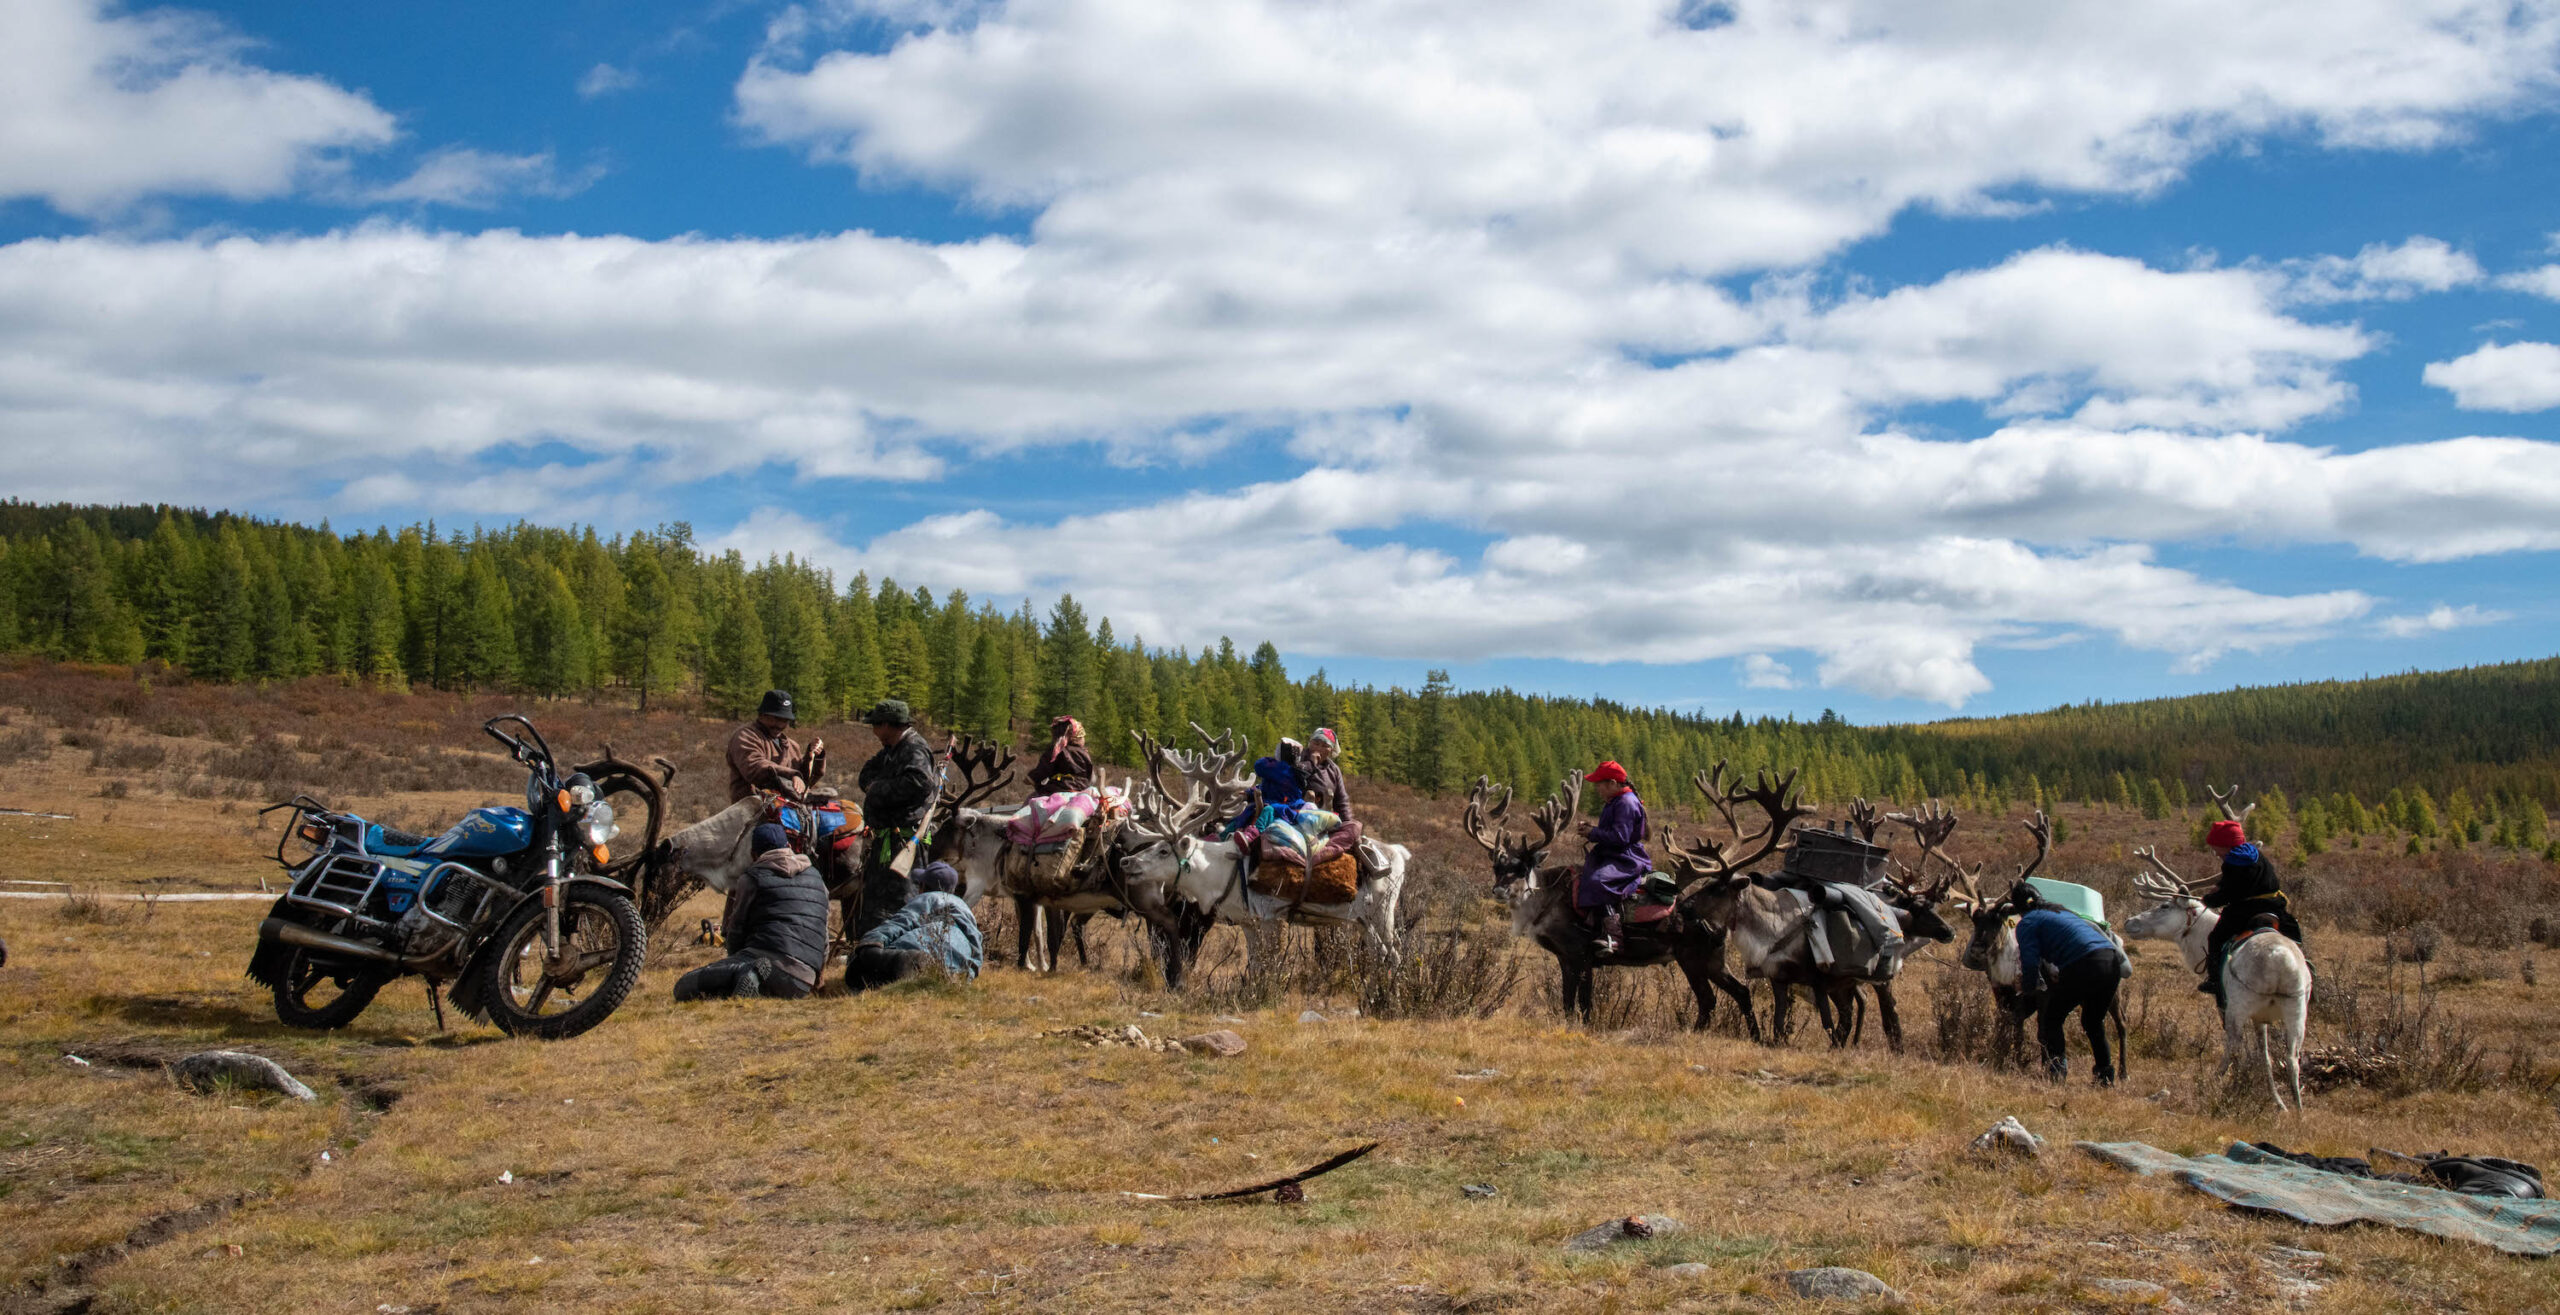 A line of herders and reindeer along a slope in front of a line of green trees in the background. The sky is blue and filled with clouds, and there is a motorcycle near the men farthest left of the halted convoy in the center of the frame.